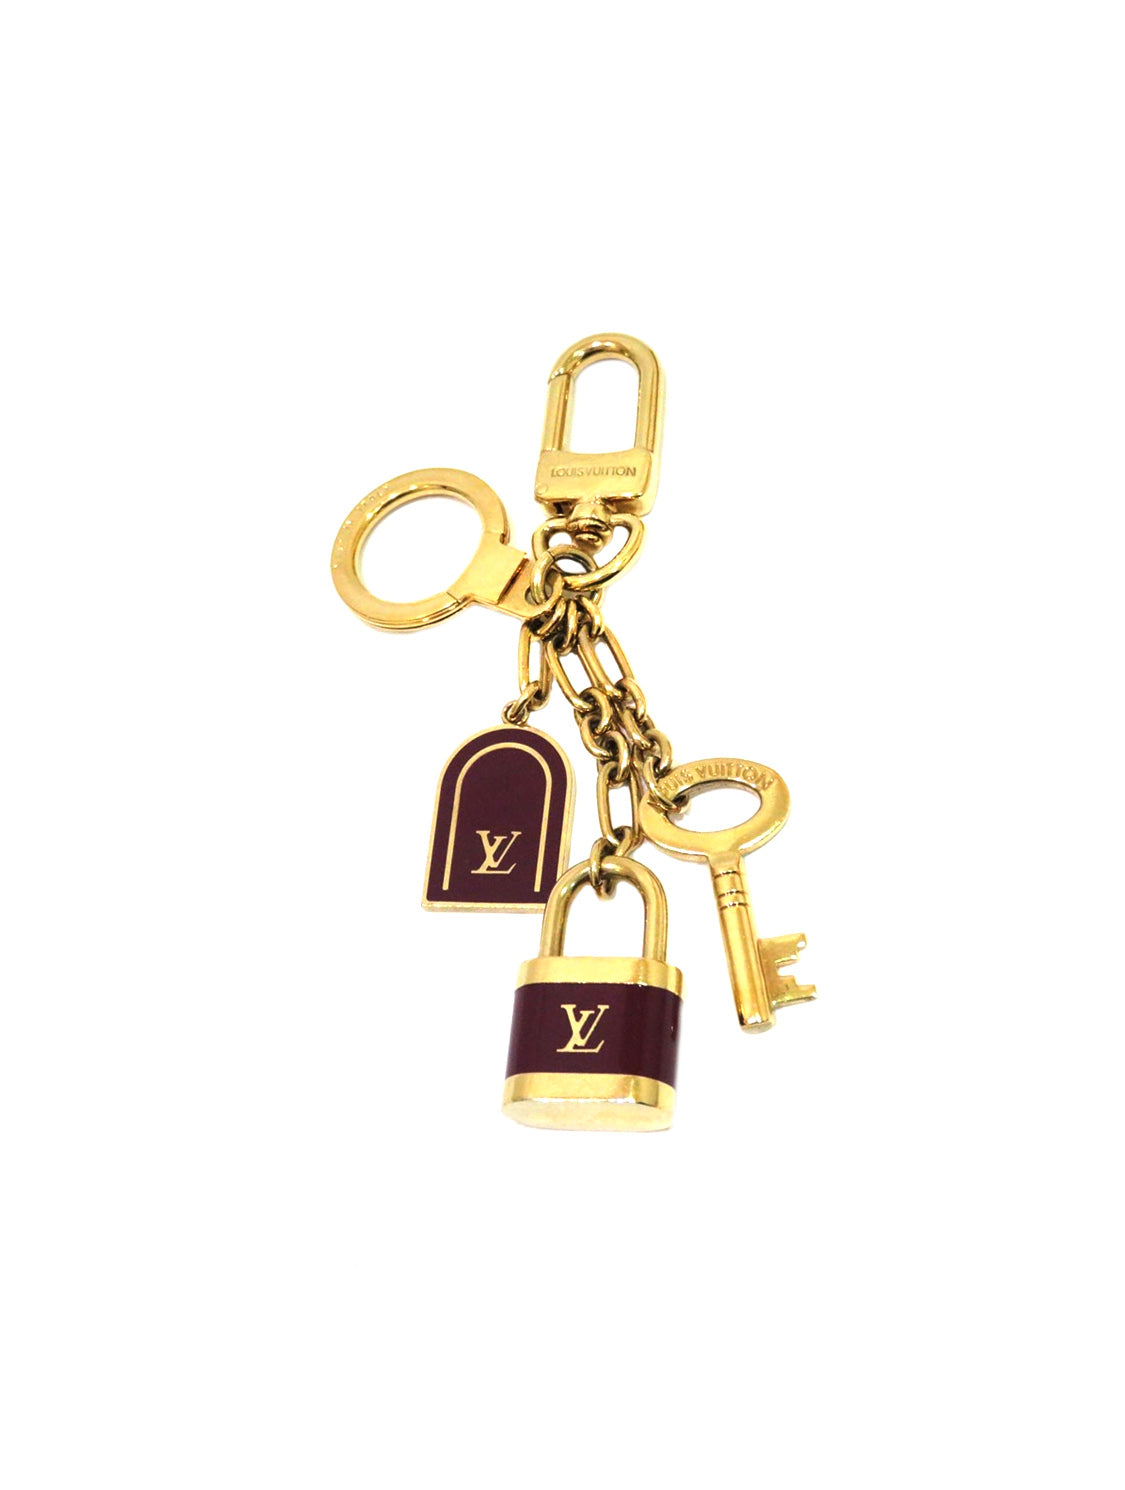 LOUIS VUITTON Gilded metal bag or key ring with a black …